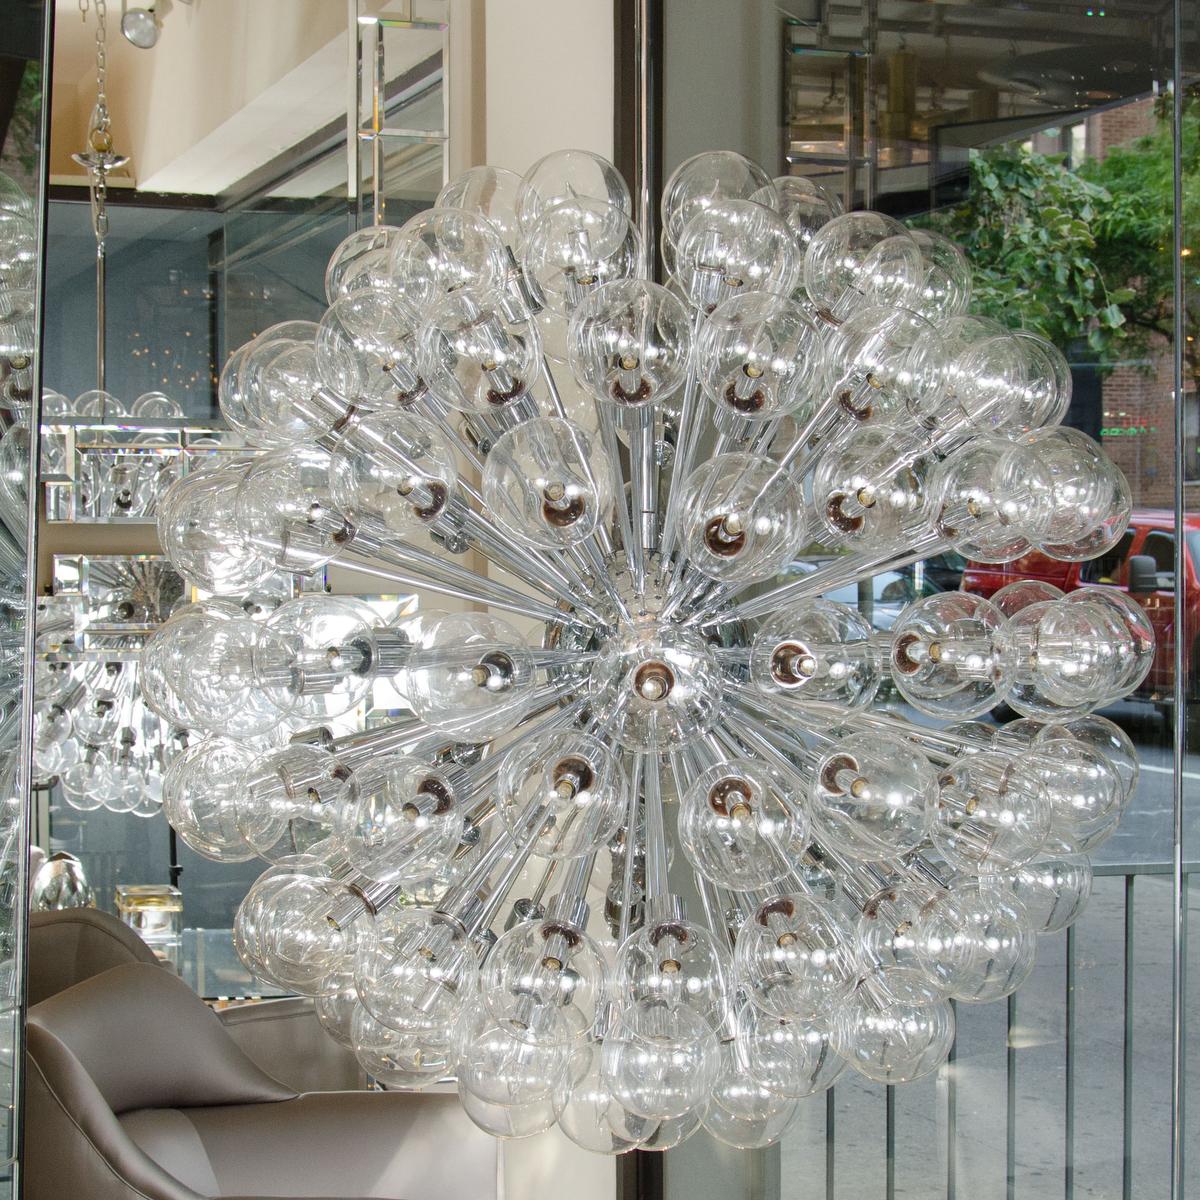 Monumental polished chrome Sputnik chandelier featuring spherical clear glass shades by Motoko Ishii for Staff Leuchten.